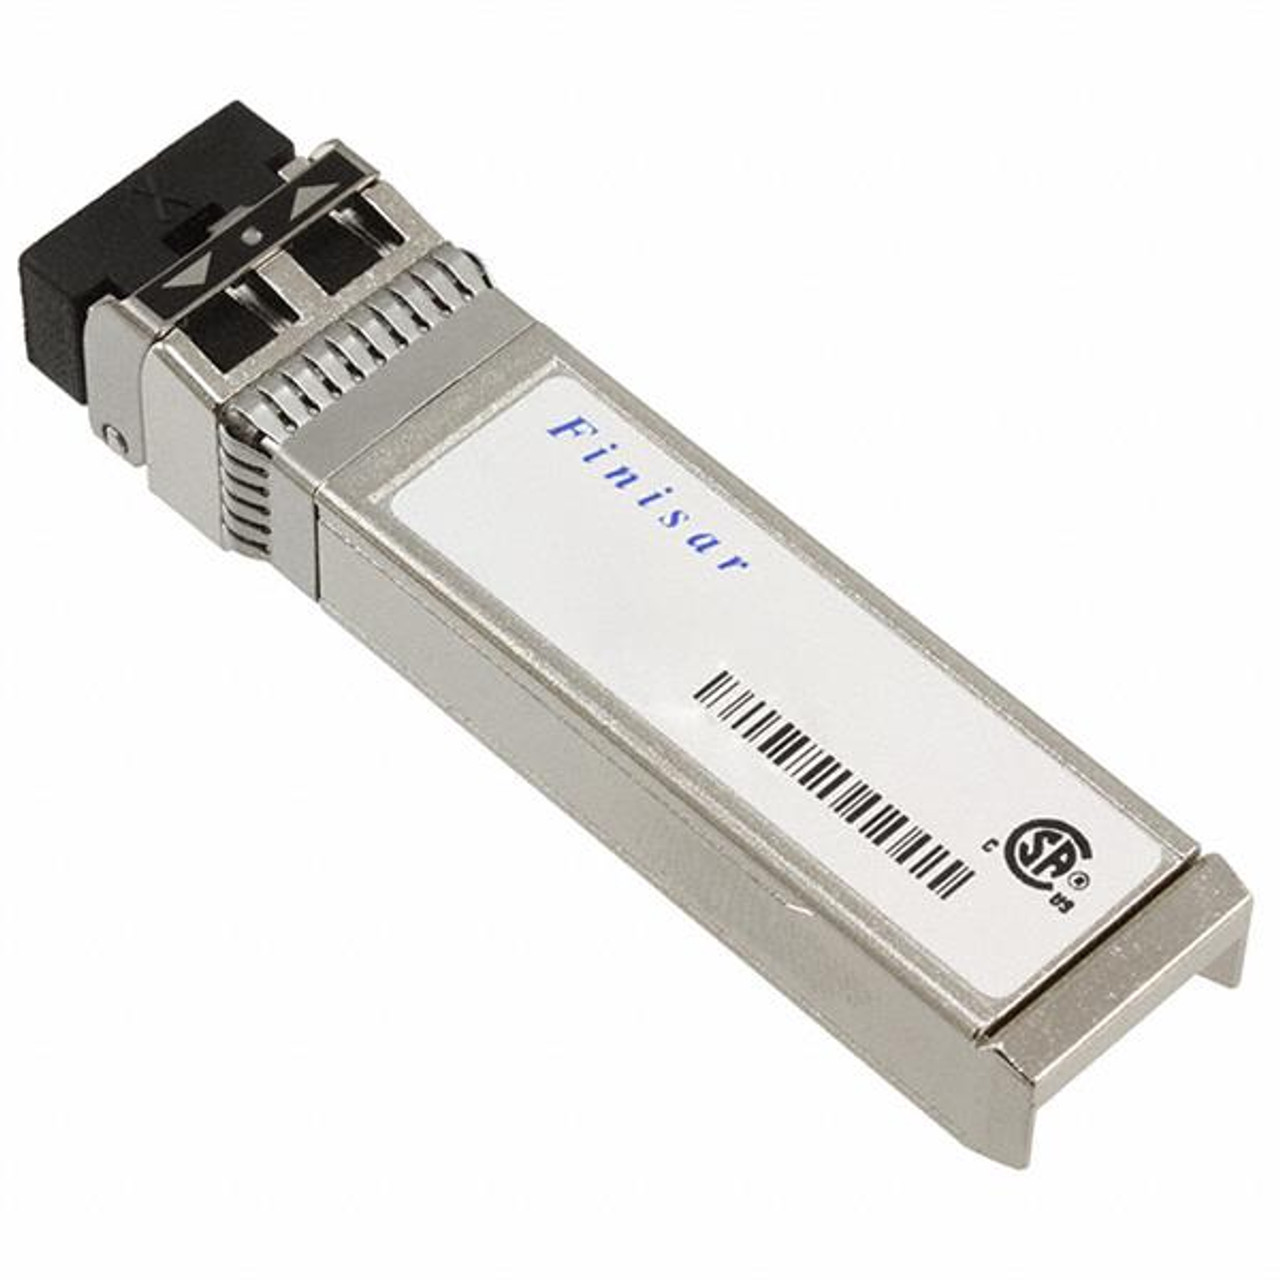 FTLX1812M3BCL Finisar 10Gbps 10GBase-ZR Single-mode Fiber 80km 1550nm Duplex LC Connector XFP Transceiver Module